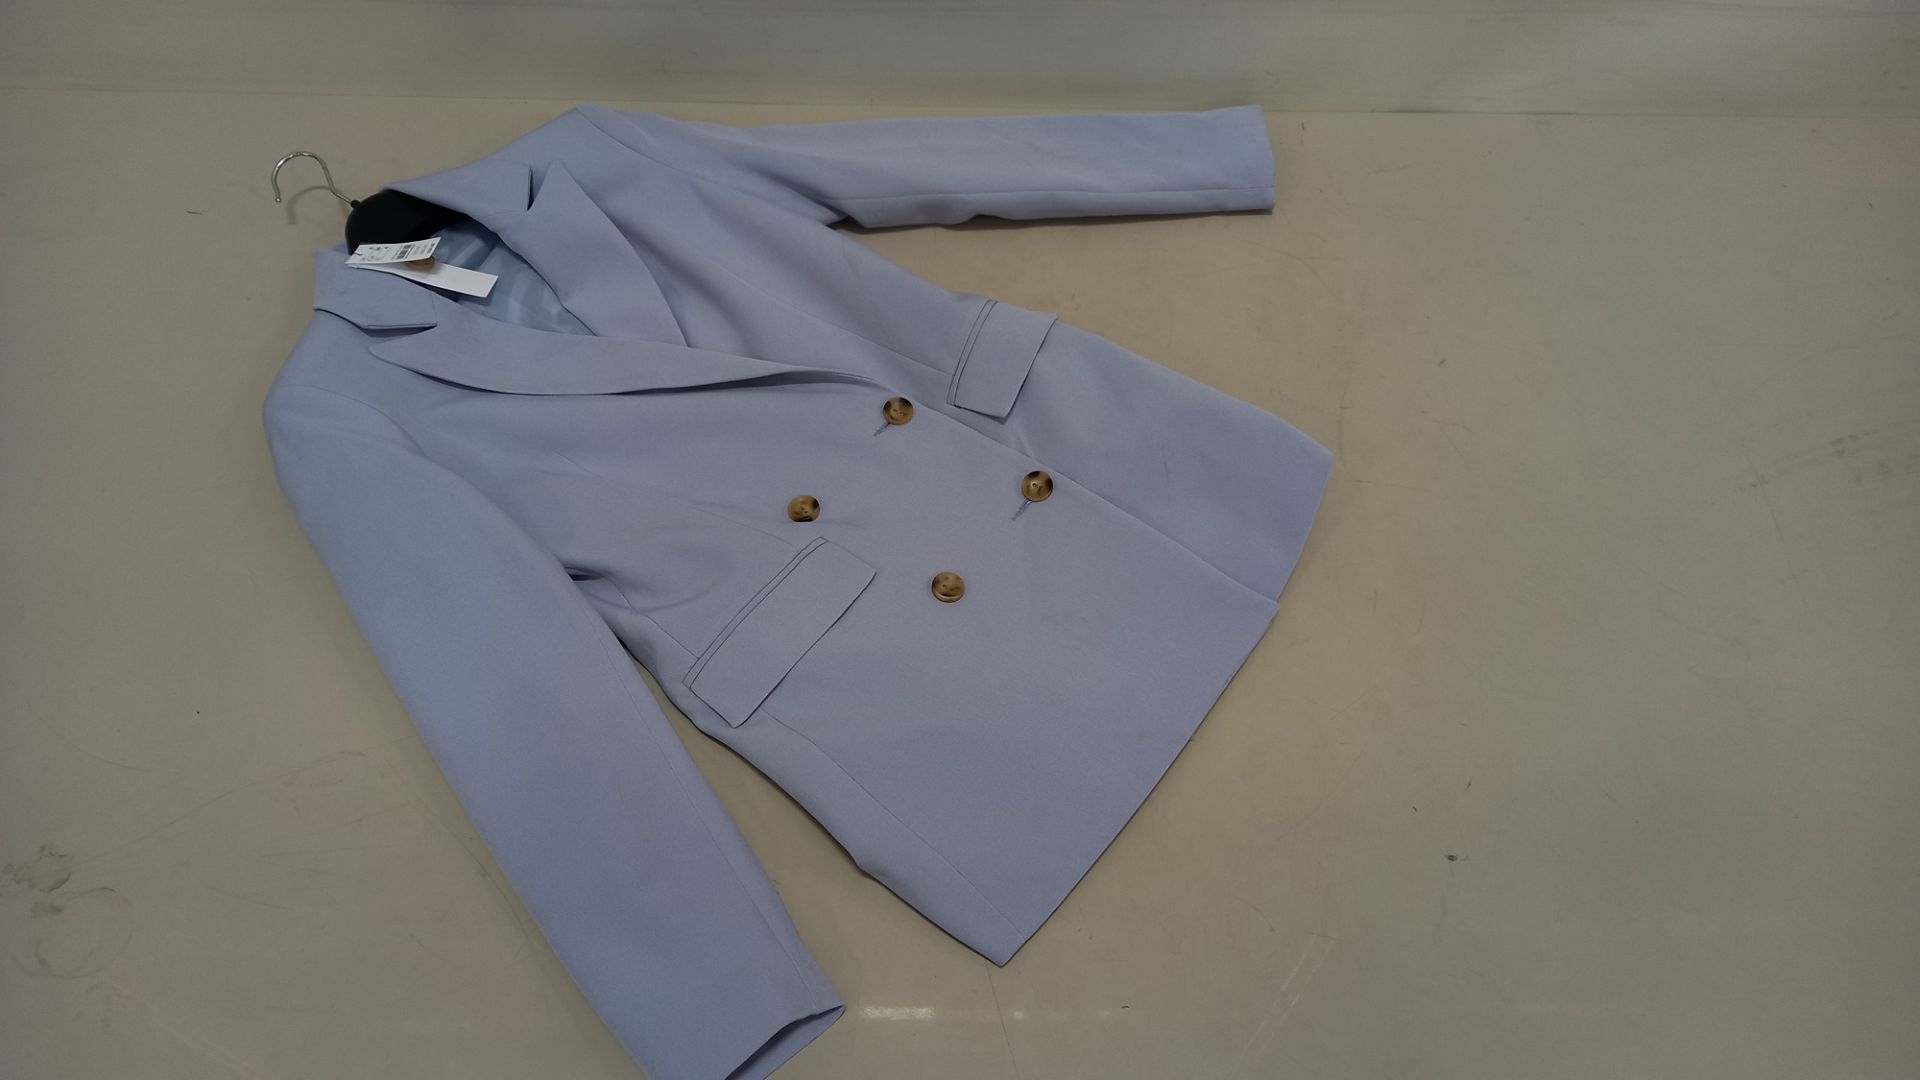 6 X BRAND NEW TOPSHOP PURPLE BUTTONED BLAZERS IN VARIOUS SIZES IE 8, 10 AND 14 RRP £59.00 (TOTAL RRP